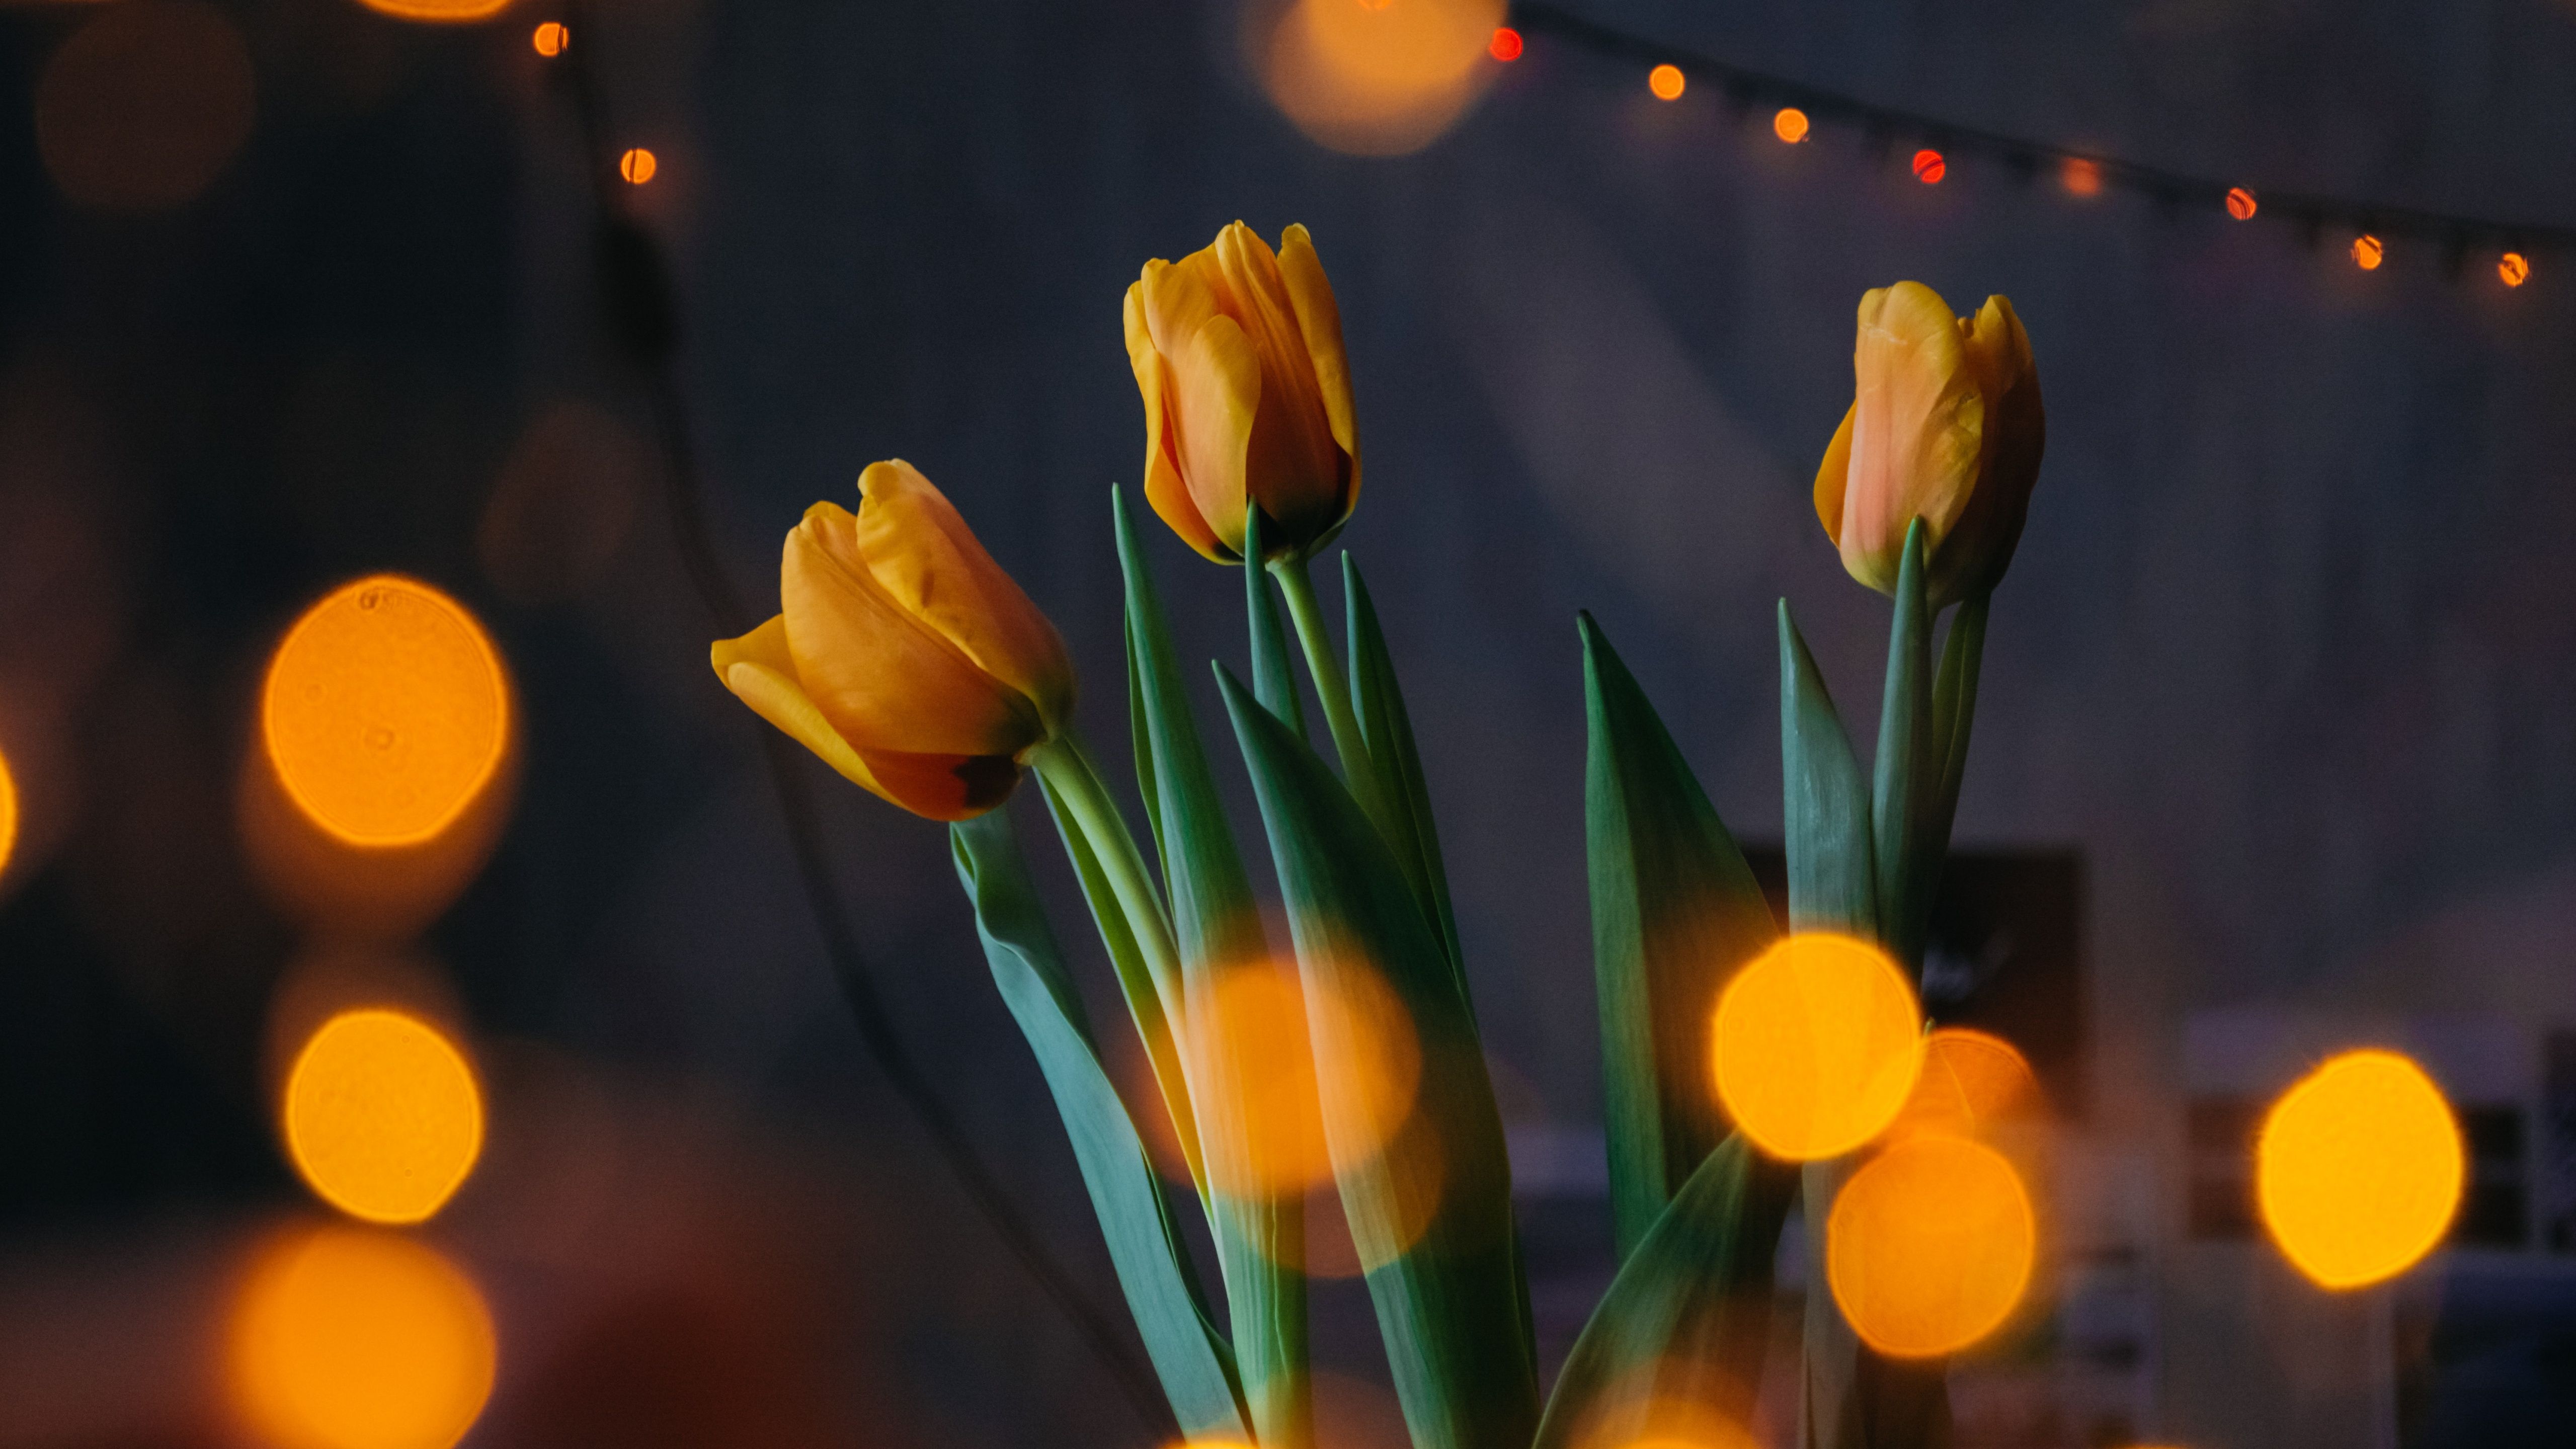 A group of four yellow tulips in front of a blurred background with orange lights. - Tulip